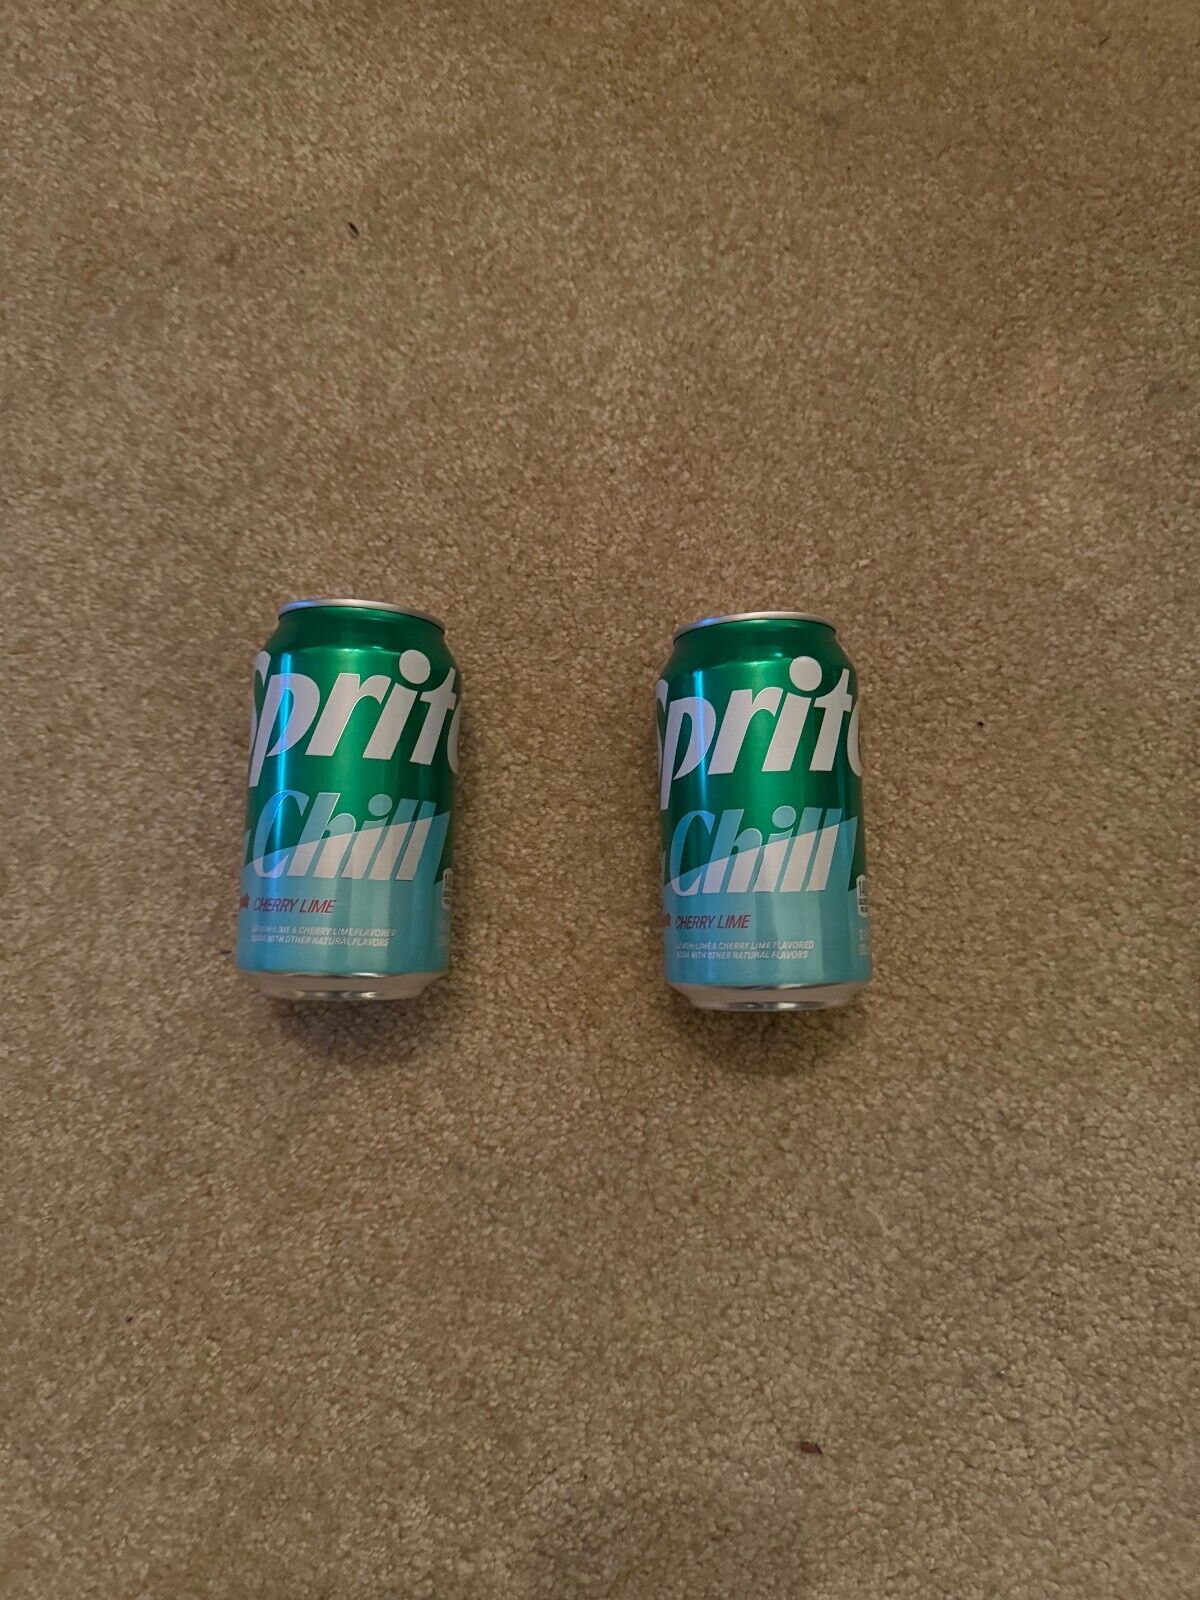 NEW LIMITED EDITION SPRITE CHILL CHERRY LIME FLAVORED SODA 2 FULL 12 OZ CANS